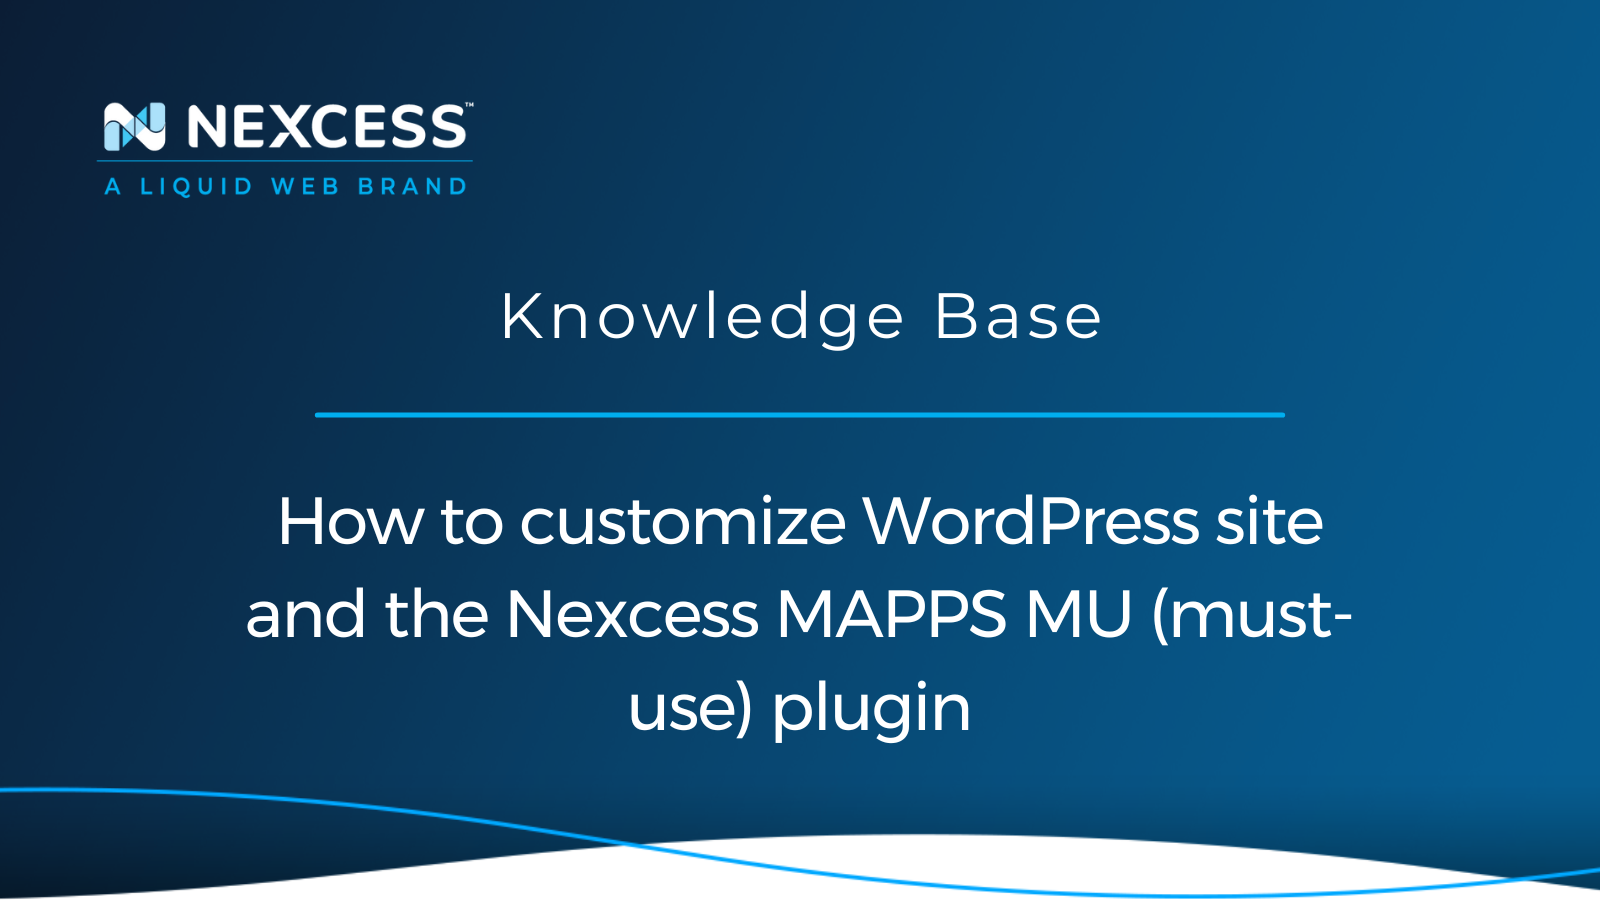 How to customize WordPress site and the Nexcess MAPPS MU (must-use) plugin